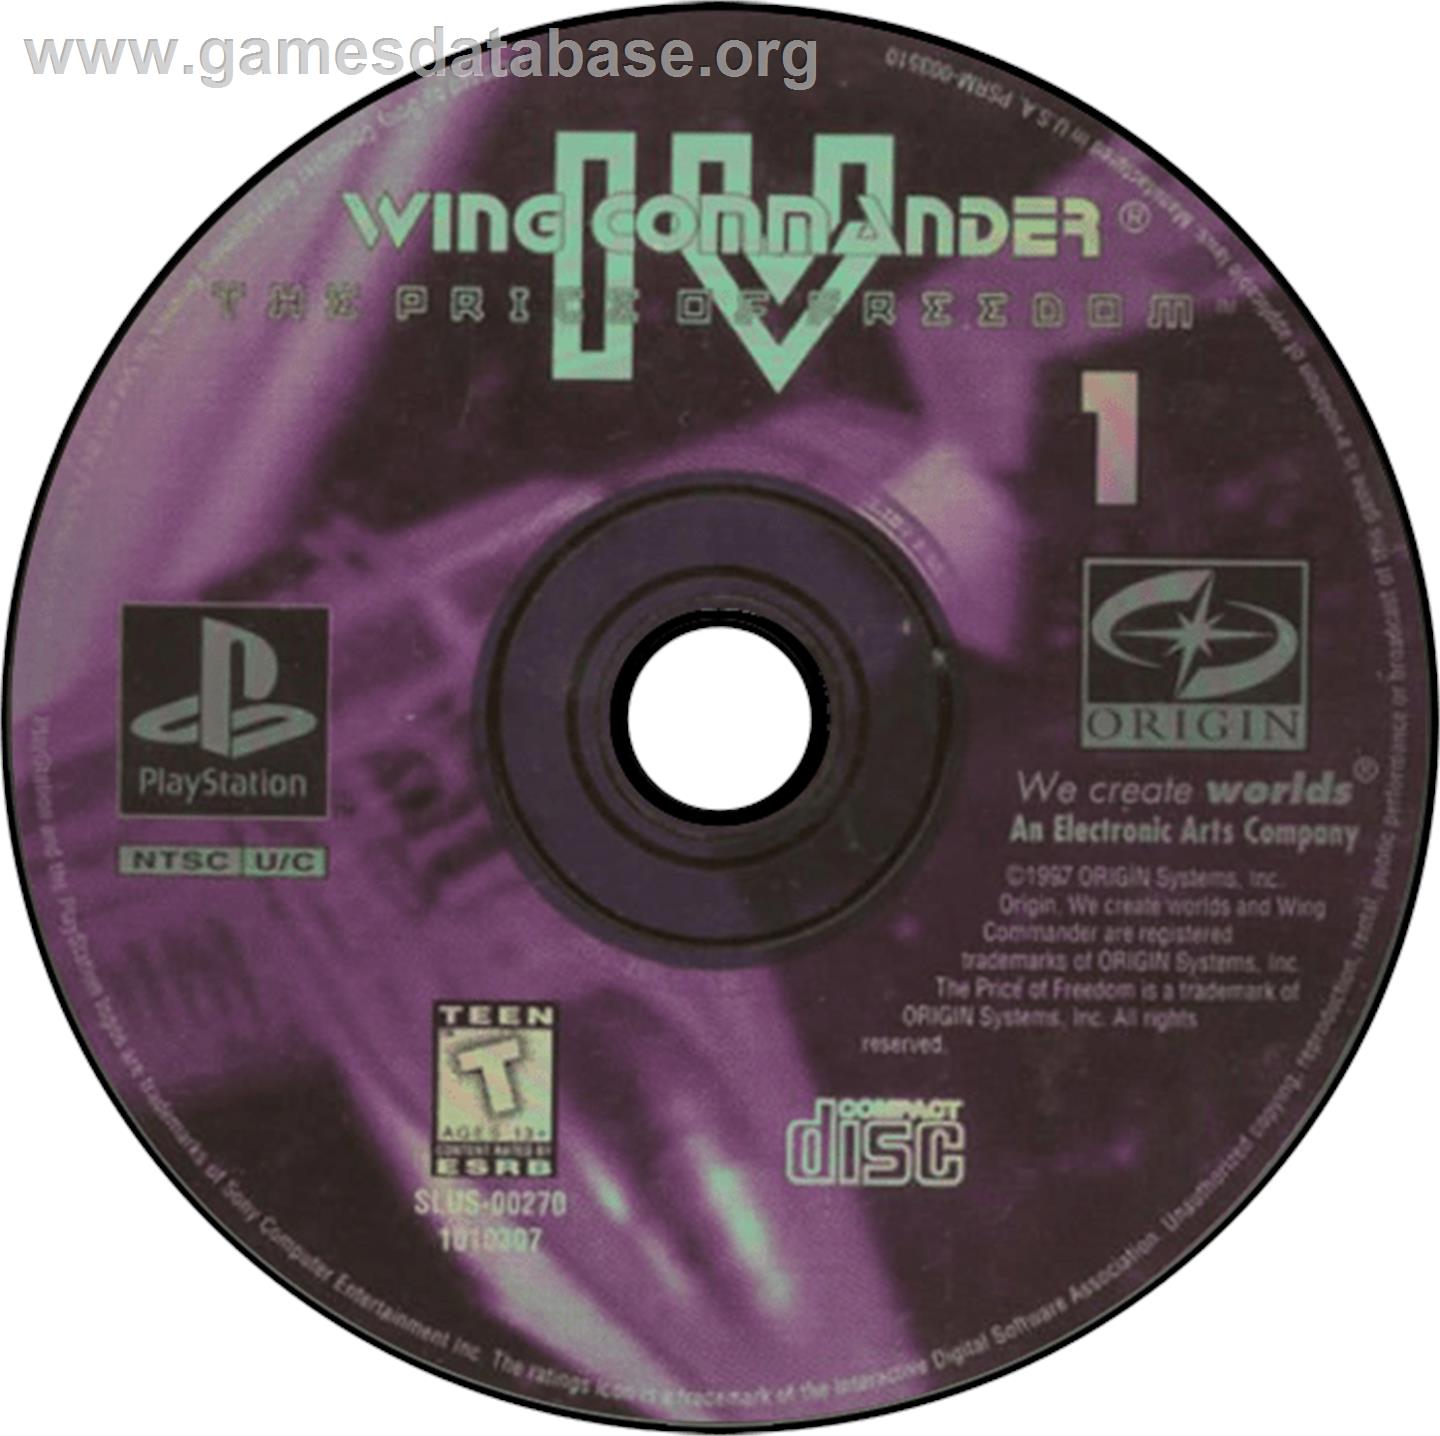 Wing Commander IV: The Price of Freedom - Sony Playstation - Artwork - Disc